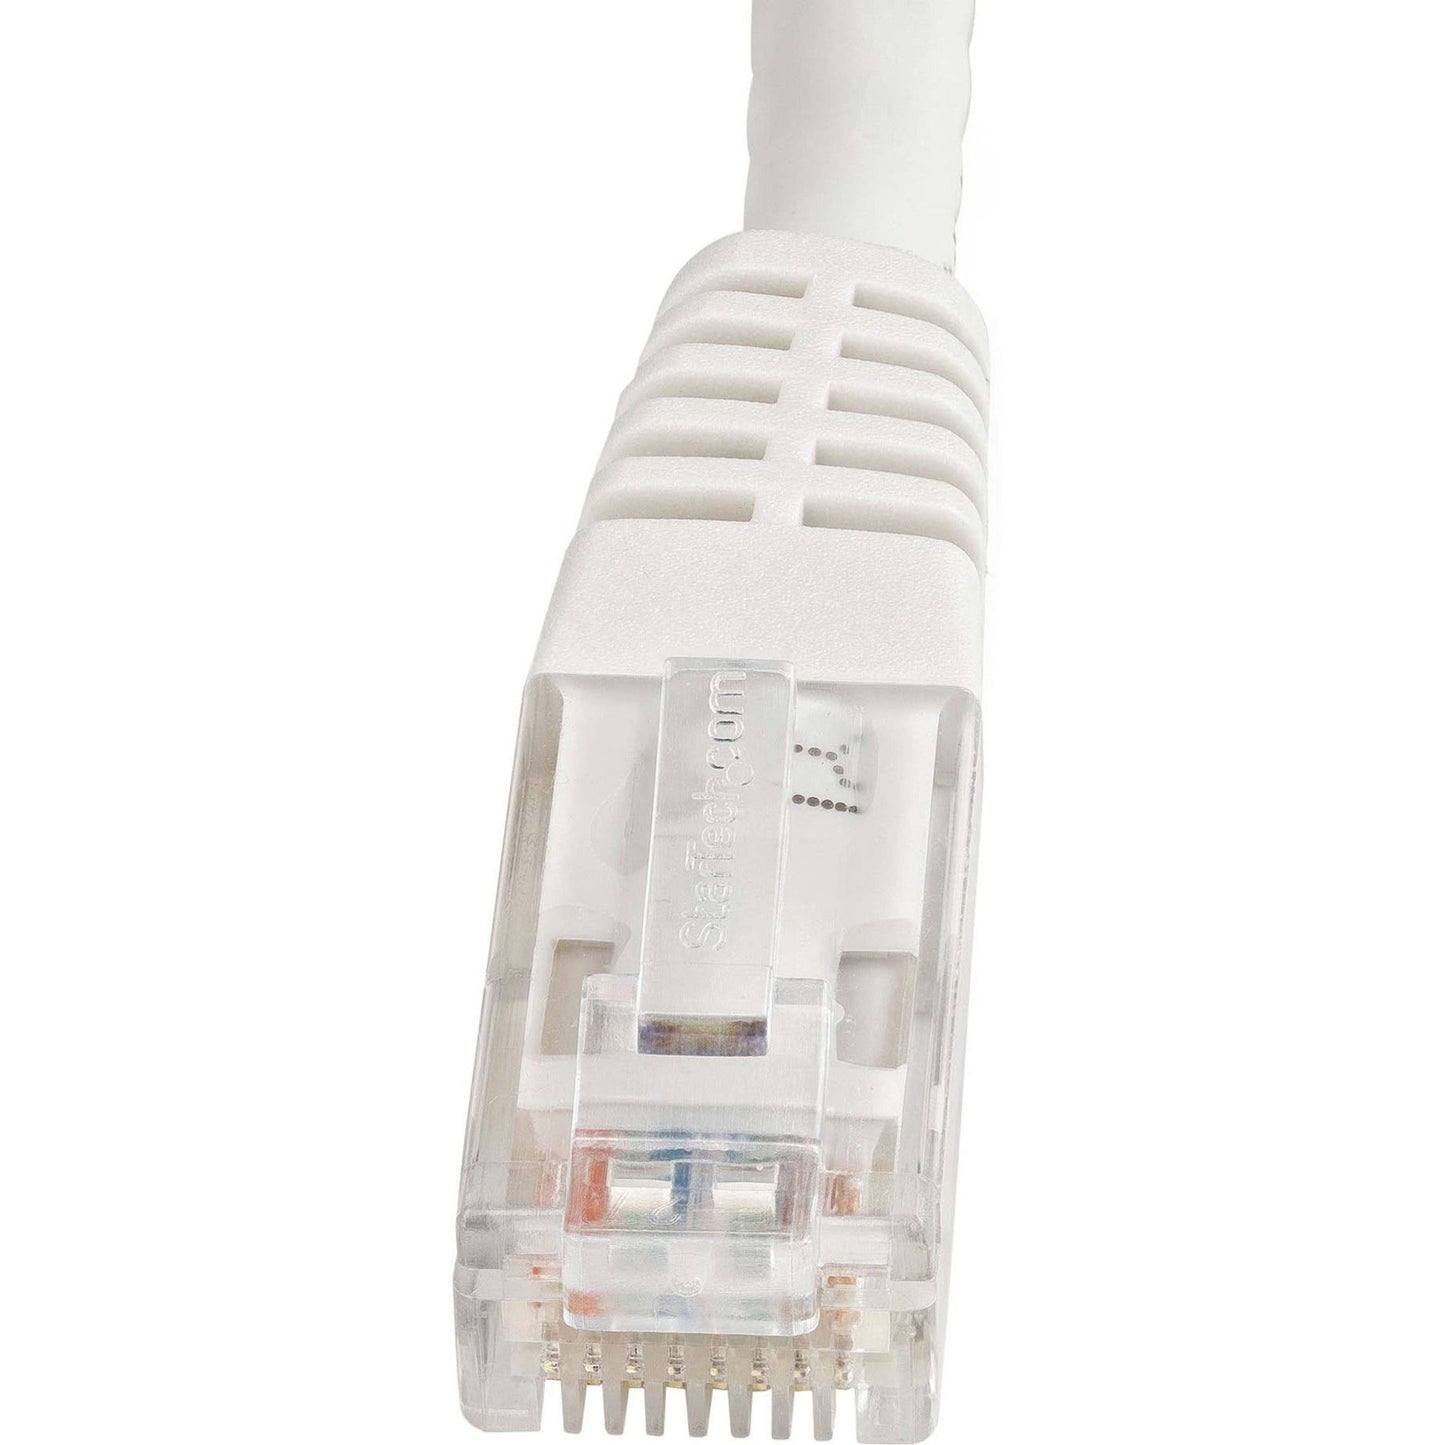 StarTech.com 2ft CAT6 Ethernet Cable - White Molded Gigabit - 100W PoE UTP 650MHz - Category 6 Patch Cord UL Certified Wiring/TIA